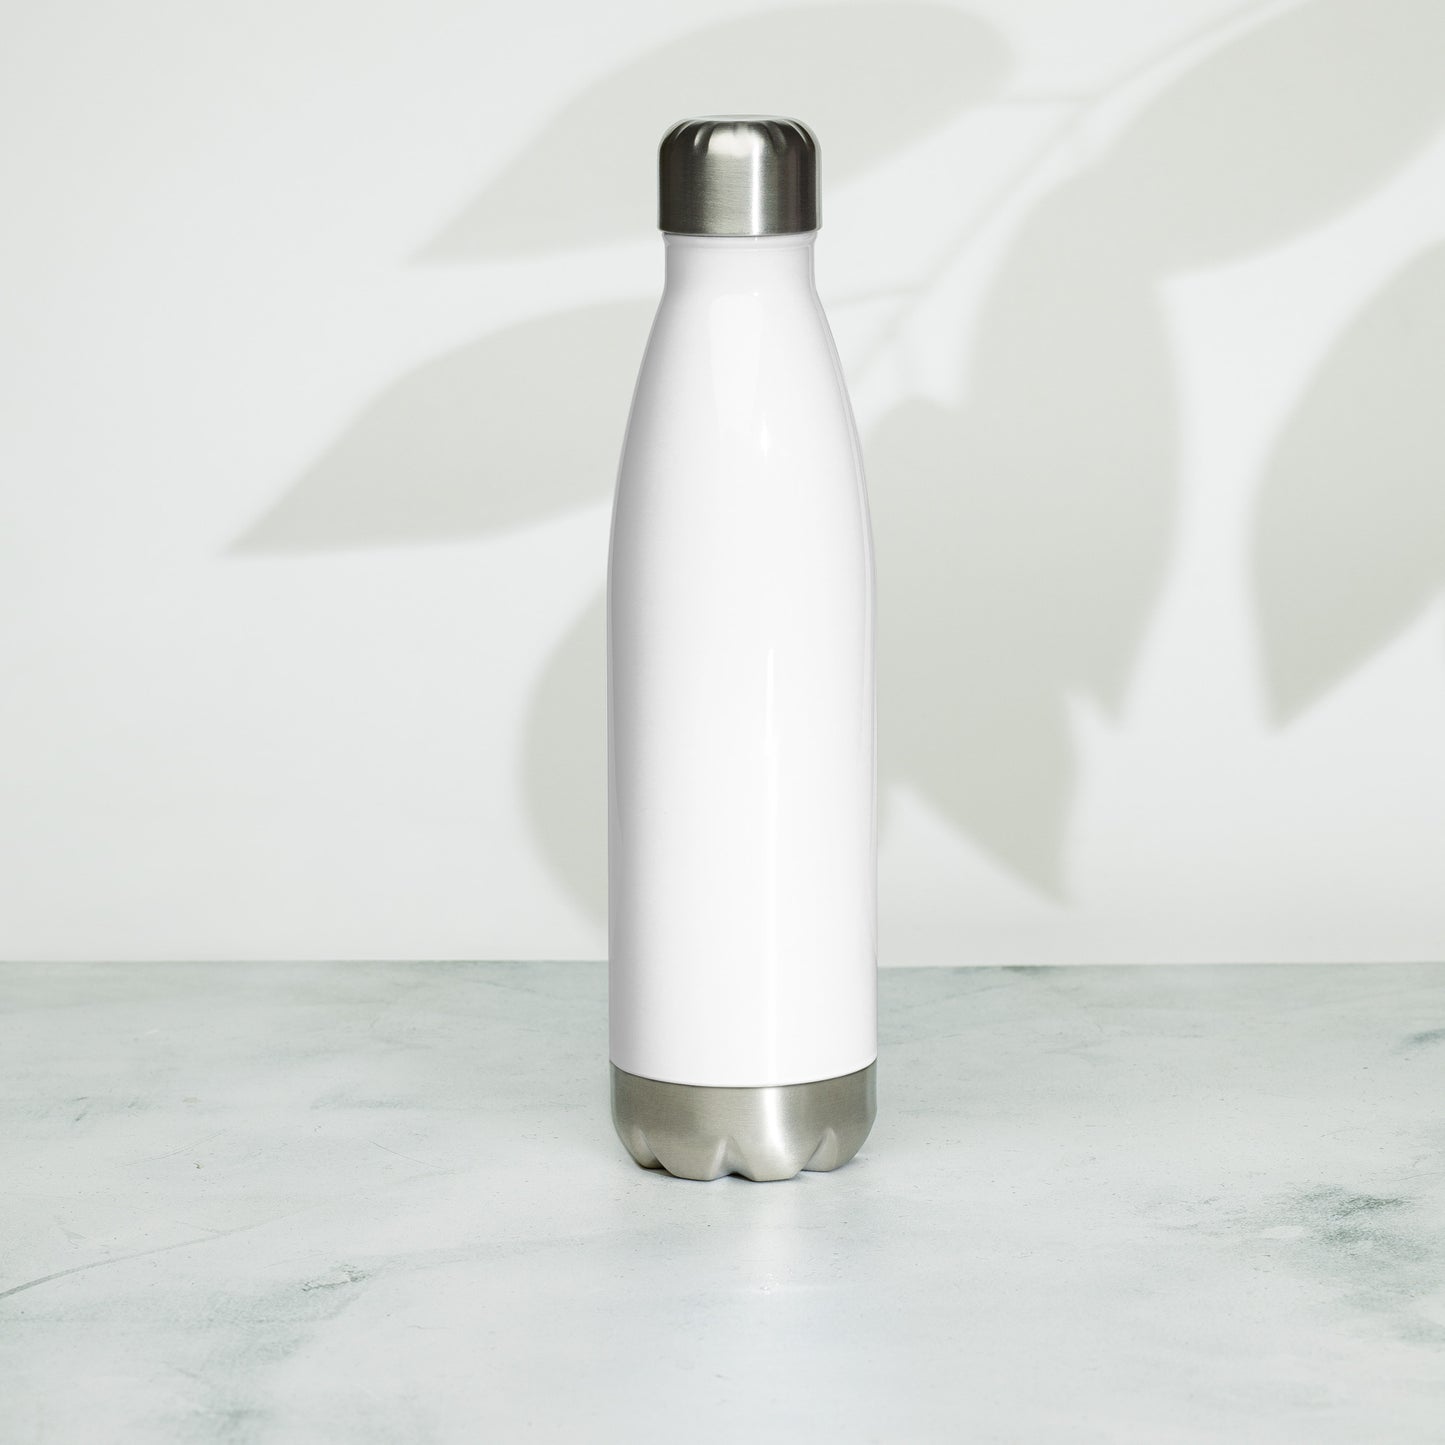 Project Defend & Protect Our Children - Stainless Steel Water Bottle